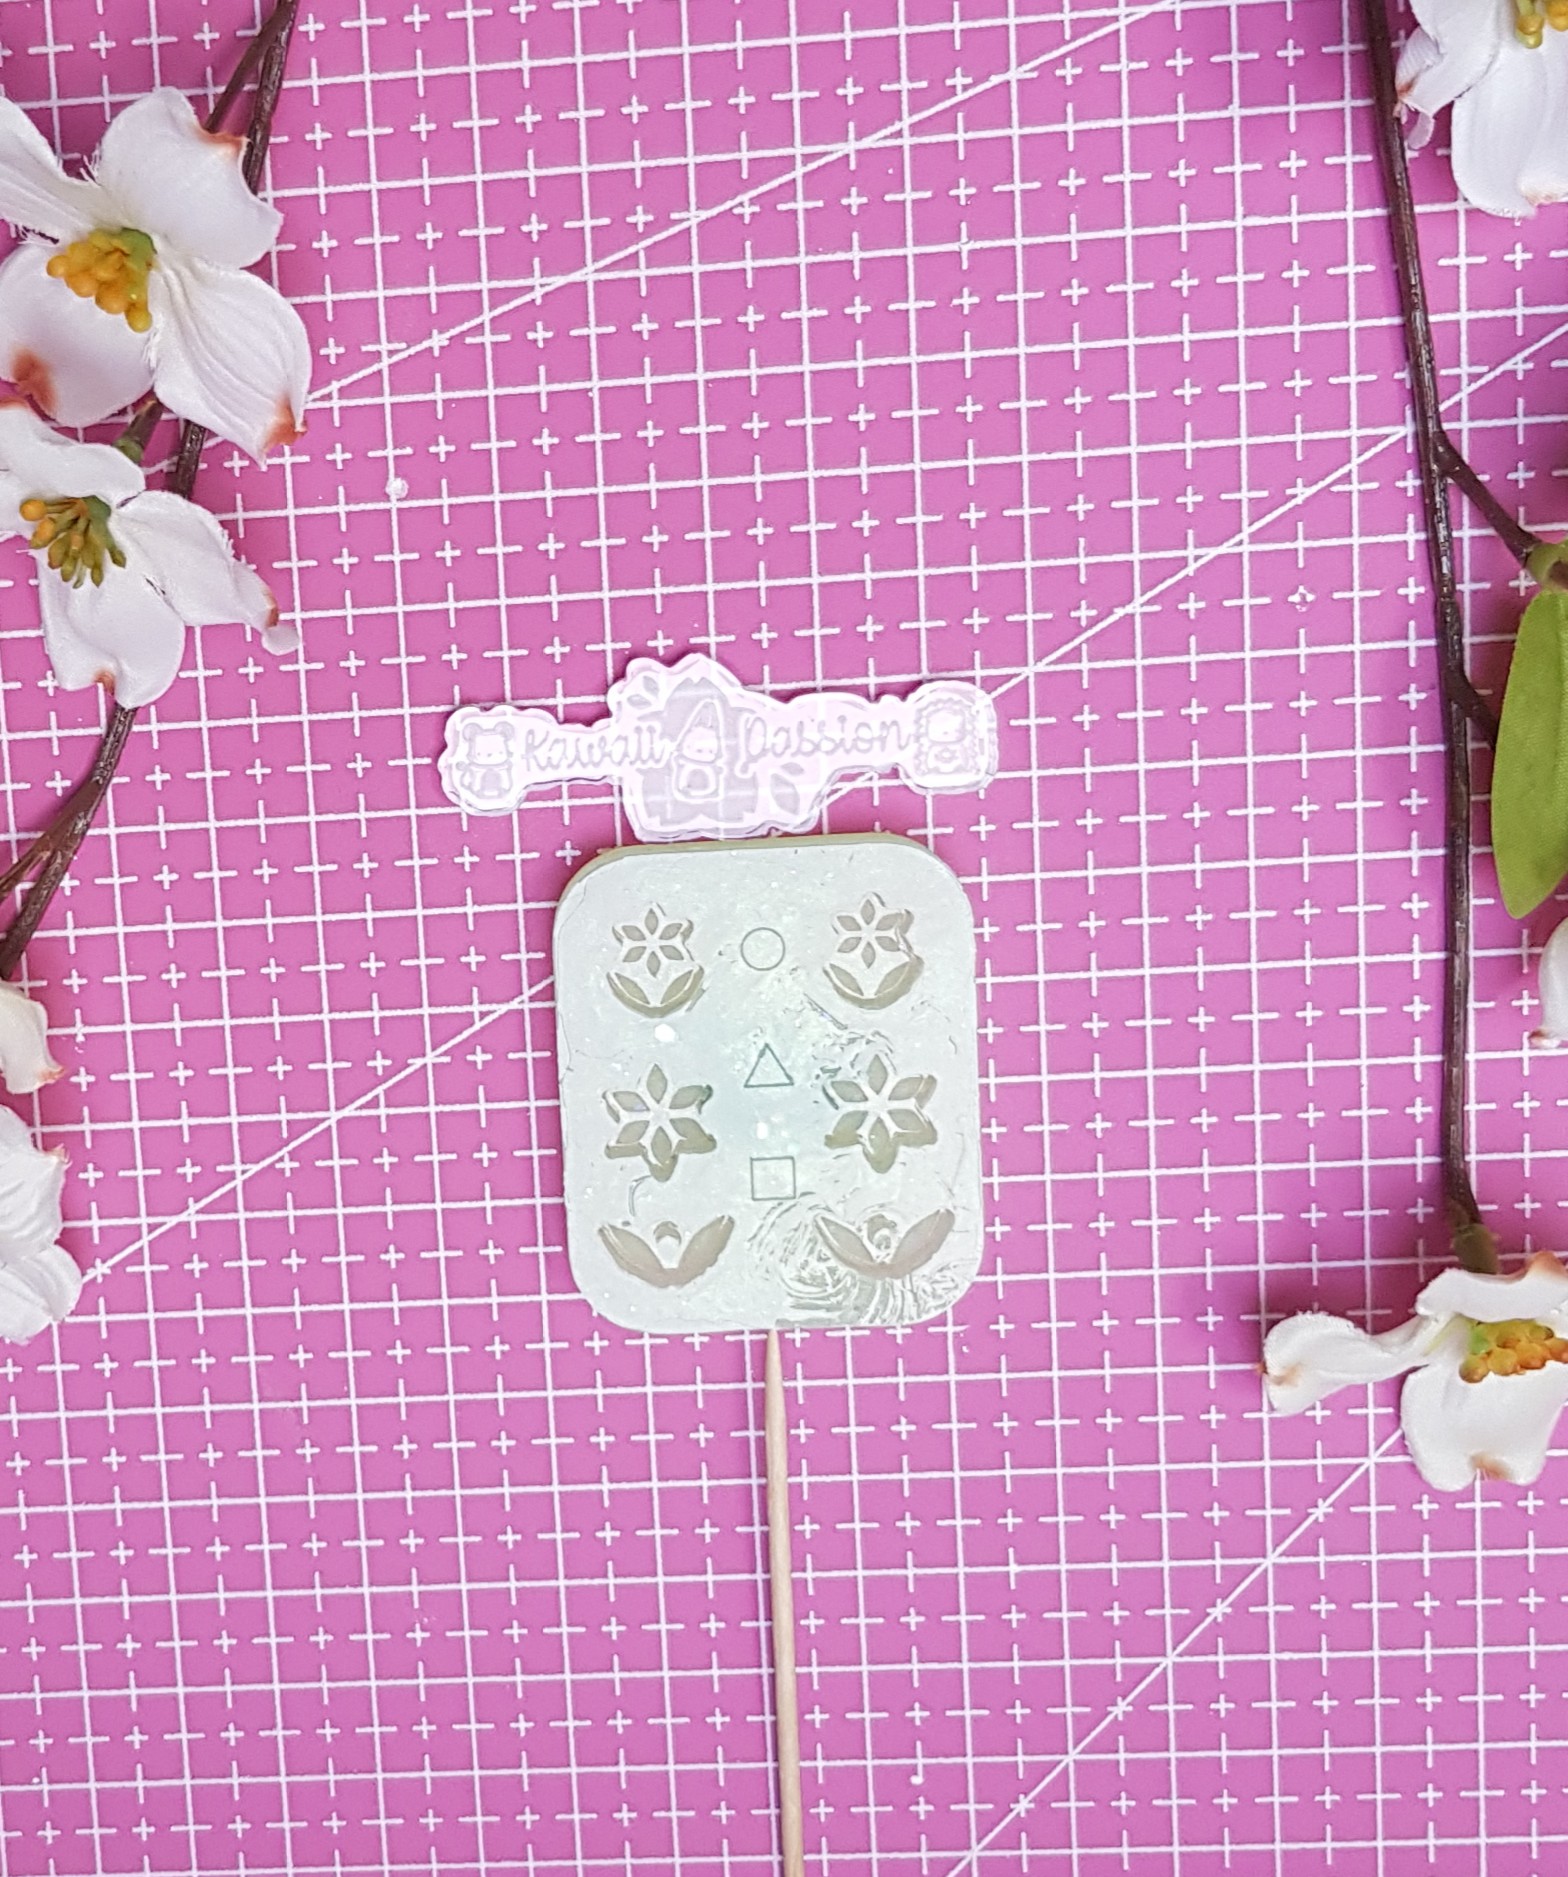 Florals on Walls Earring Pallet